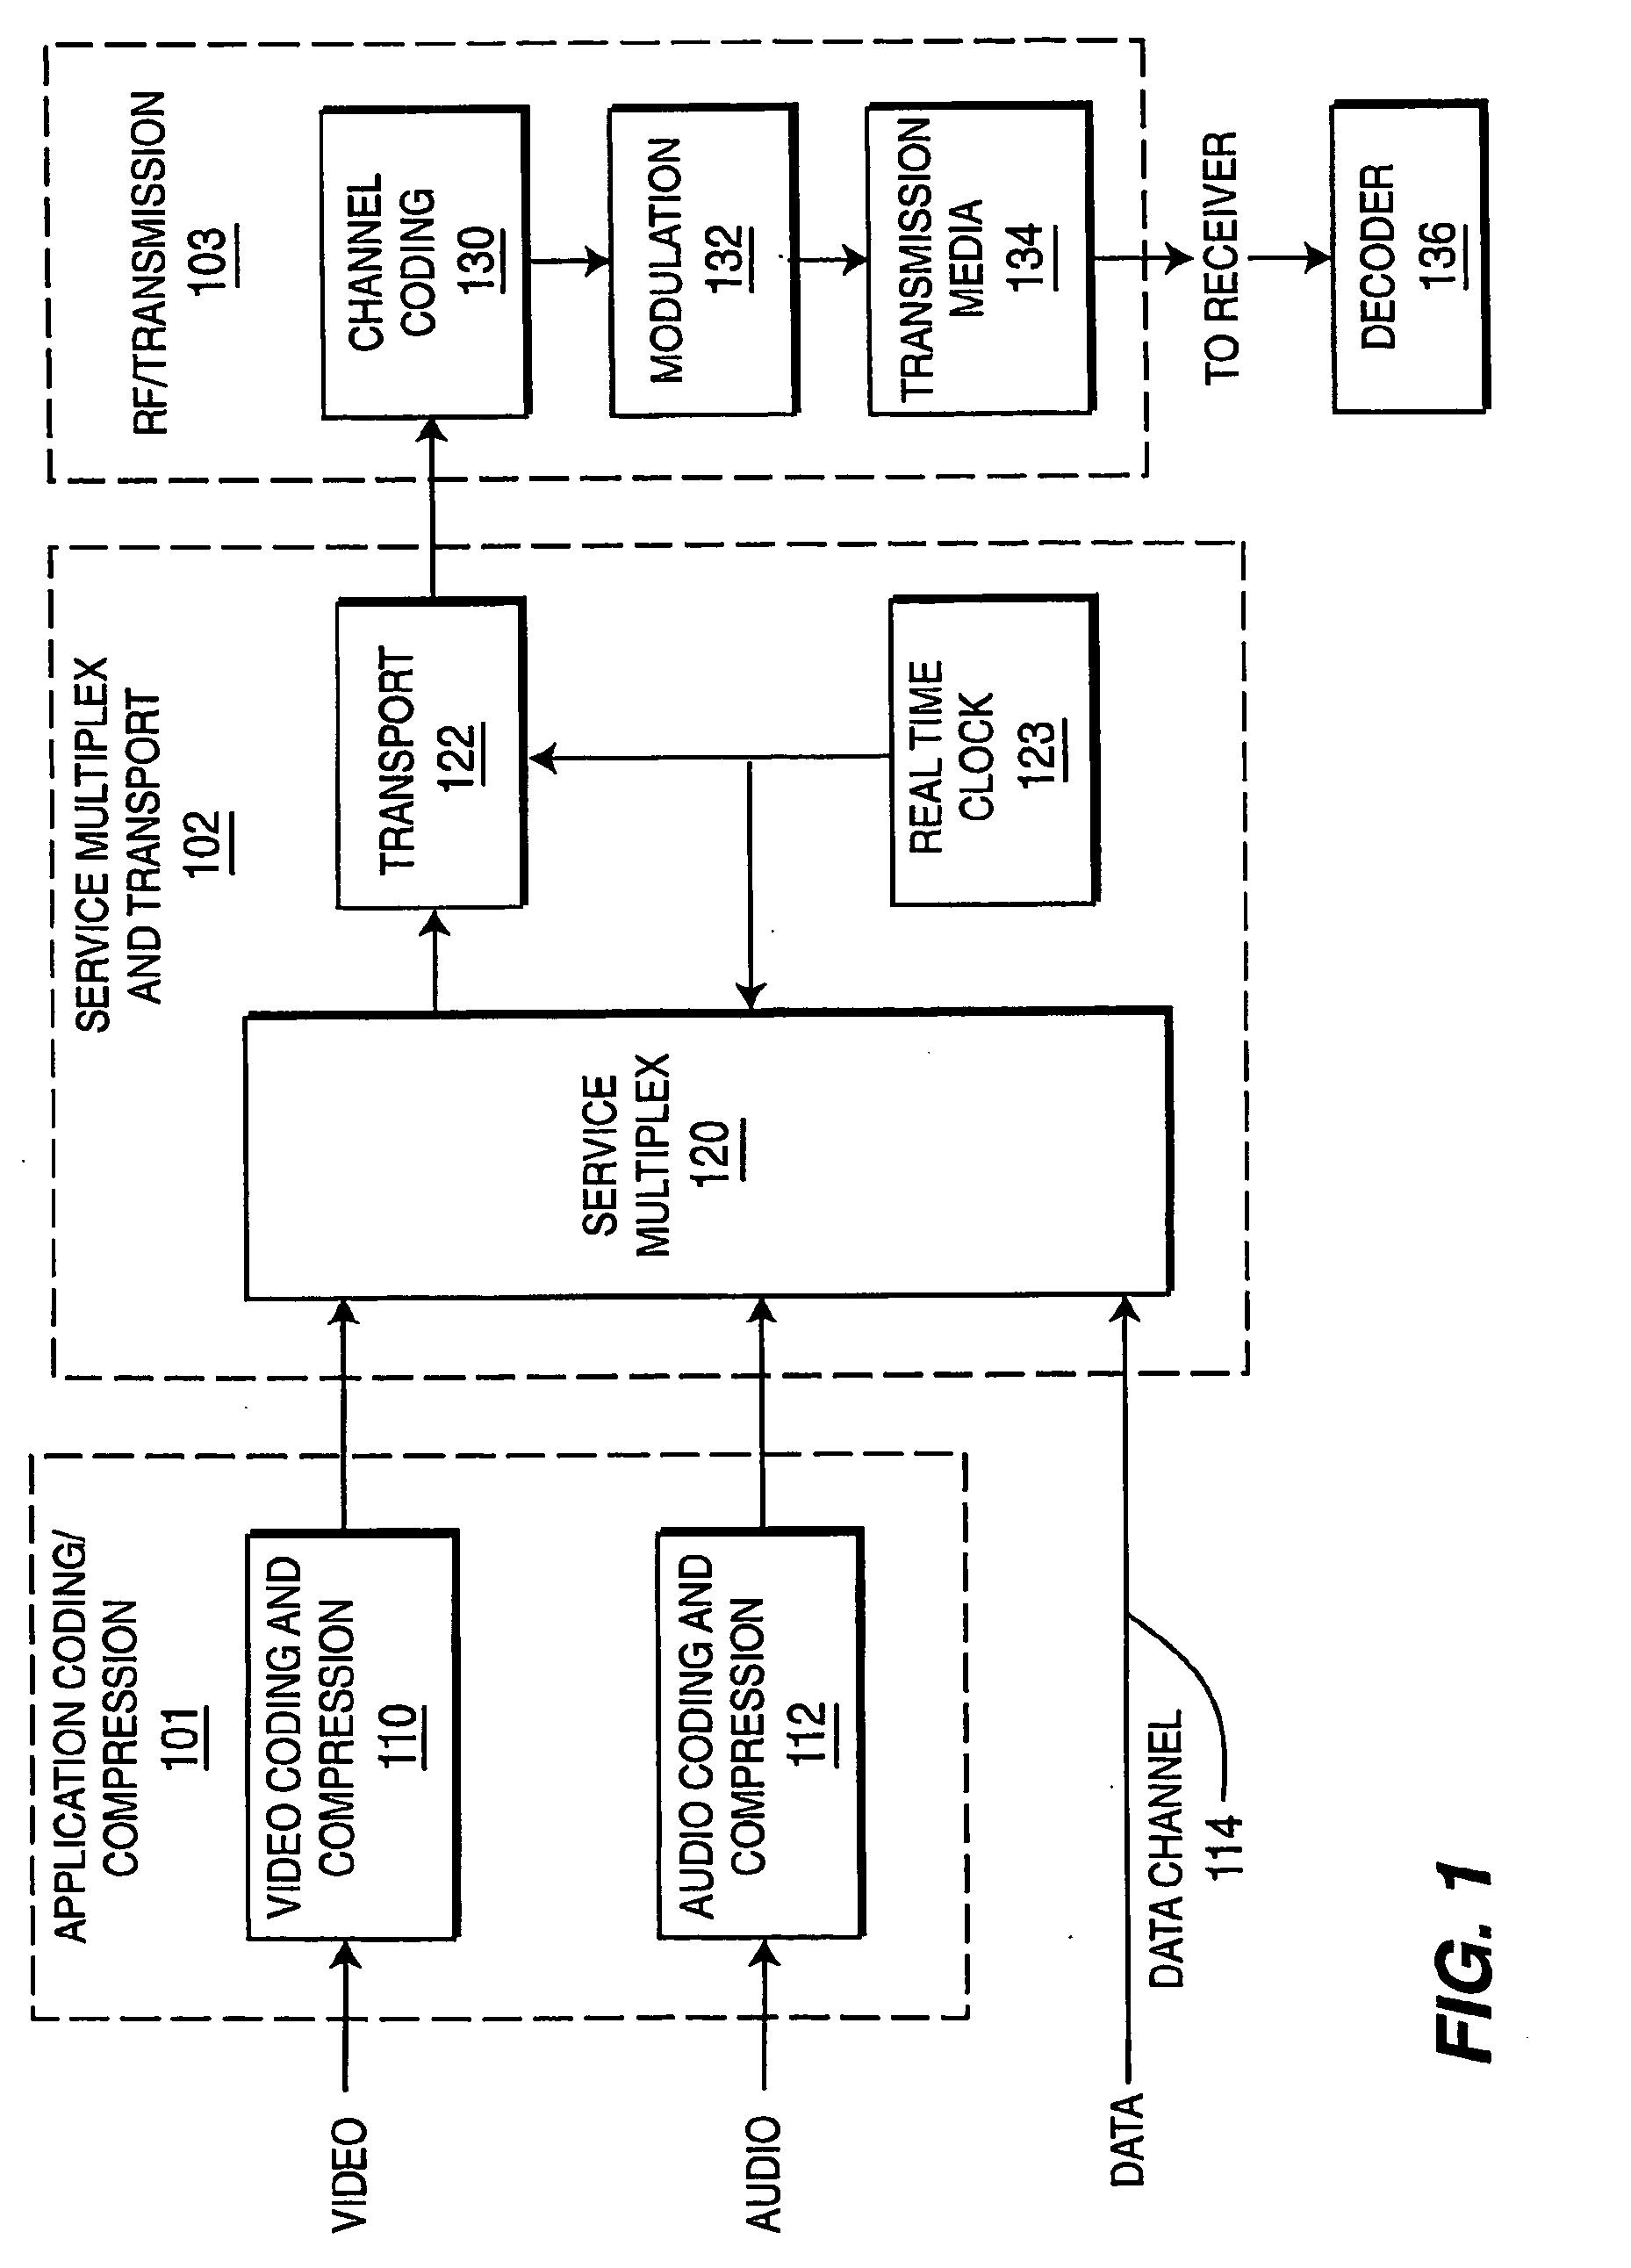 System and method for broadcast of independently encoded signals on atsc channels